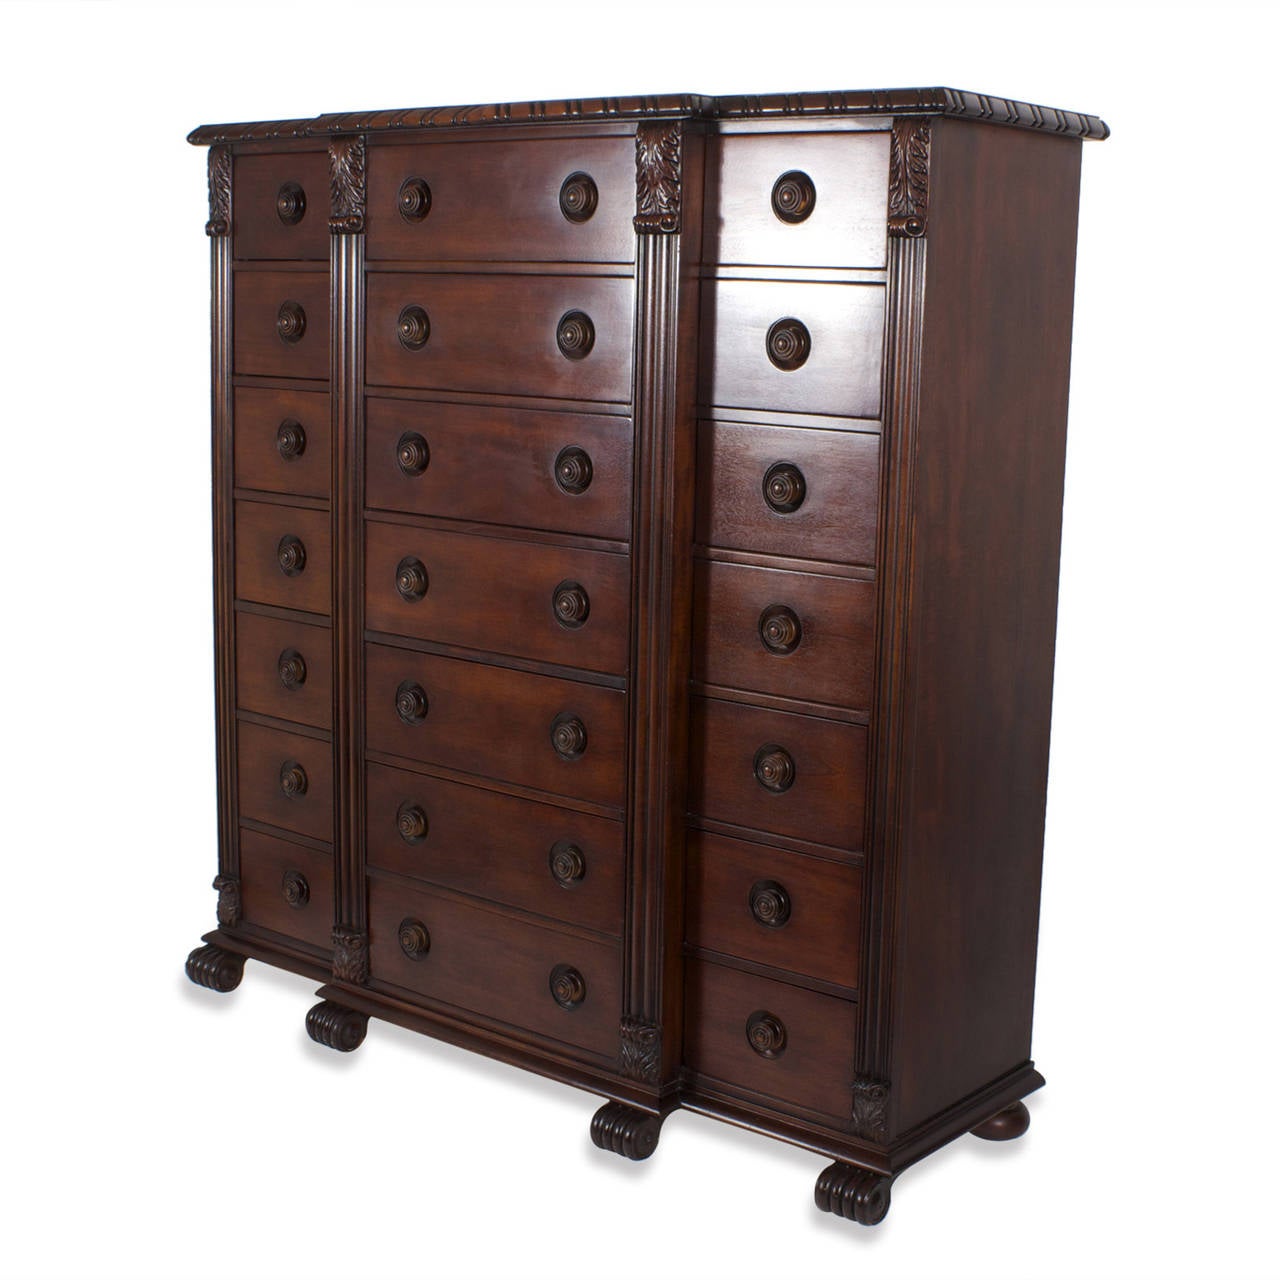 Ralph Lauren Polo gentlemans chest with 21drawers. Designed in a handsome regency style featuring Napoleonic columns and acanthus leaves all in mahogany with a bold manly scale. Ralph Lauren brass label in the upper right drawer.
Newly polished.